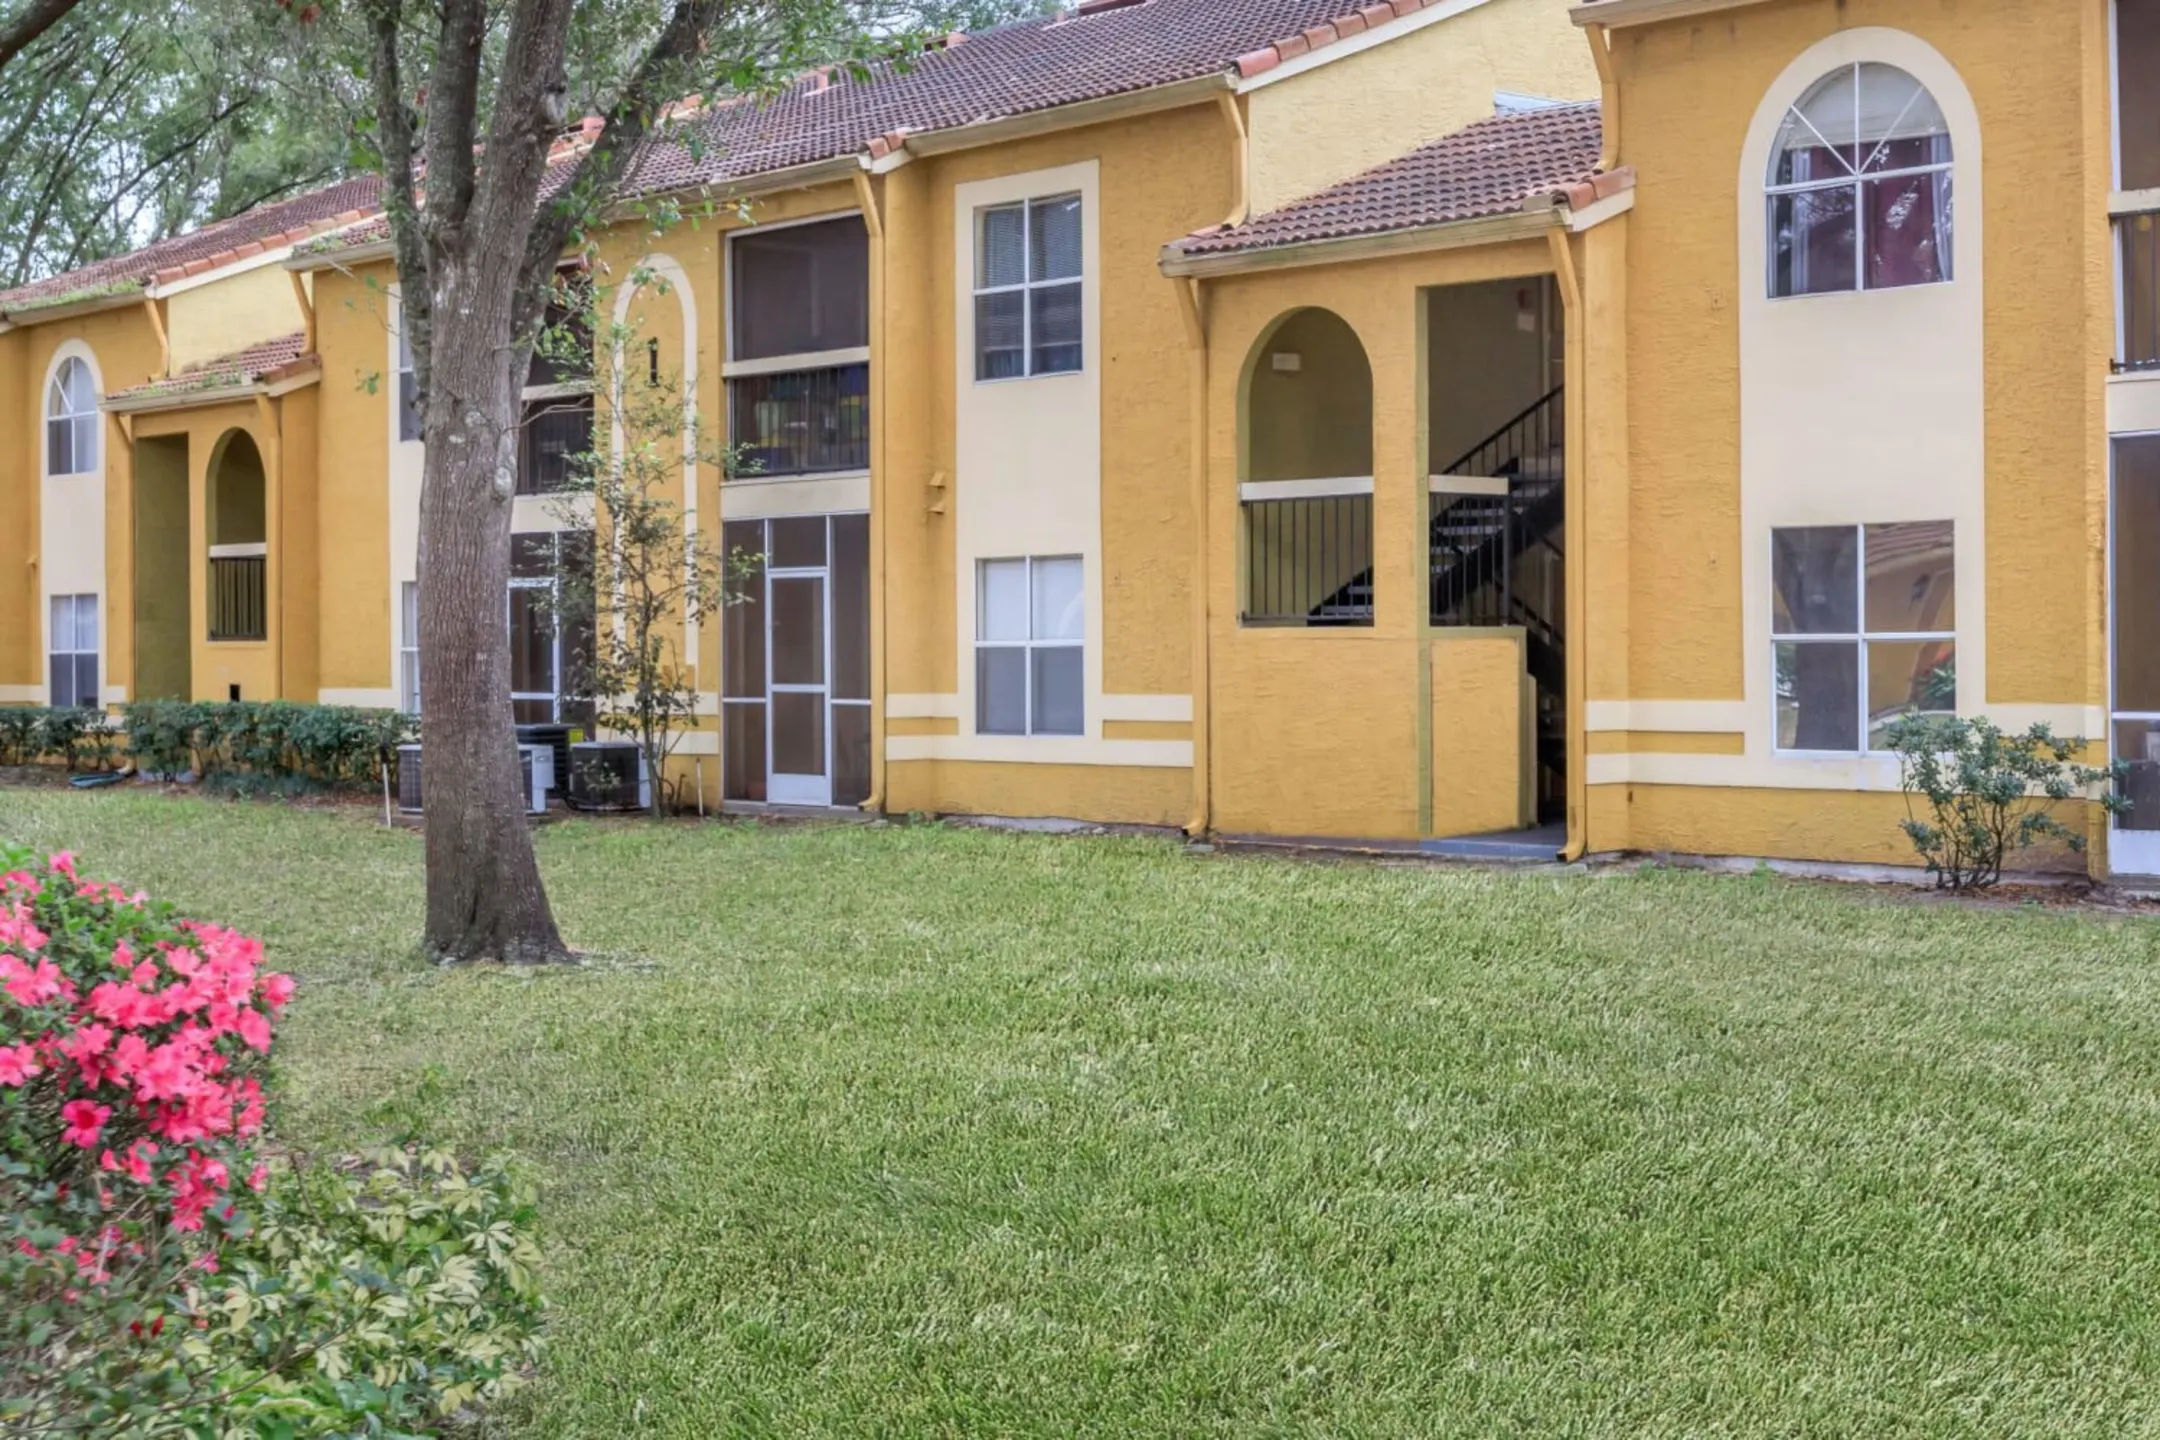 Building - Images Apartments - Kissimmee, FL